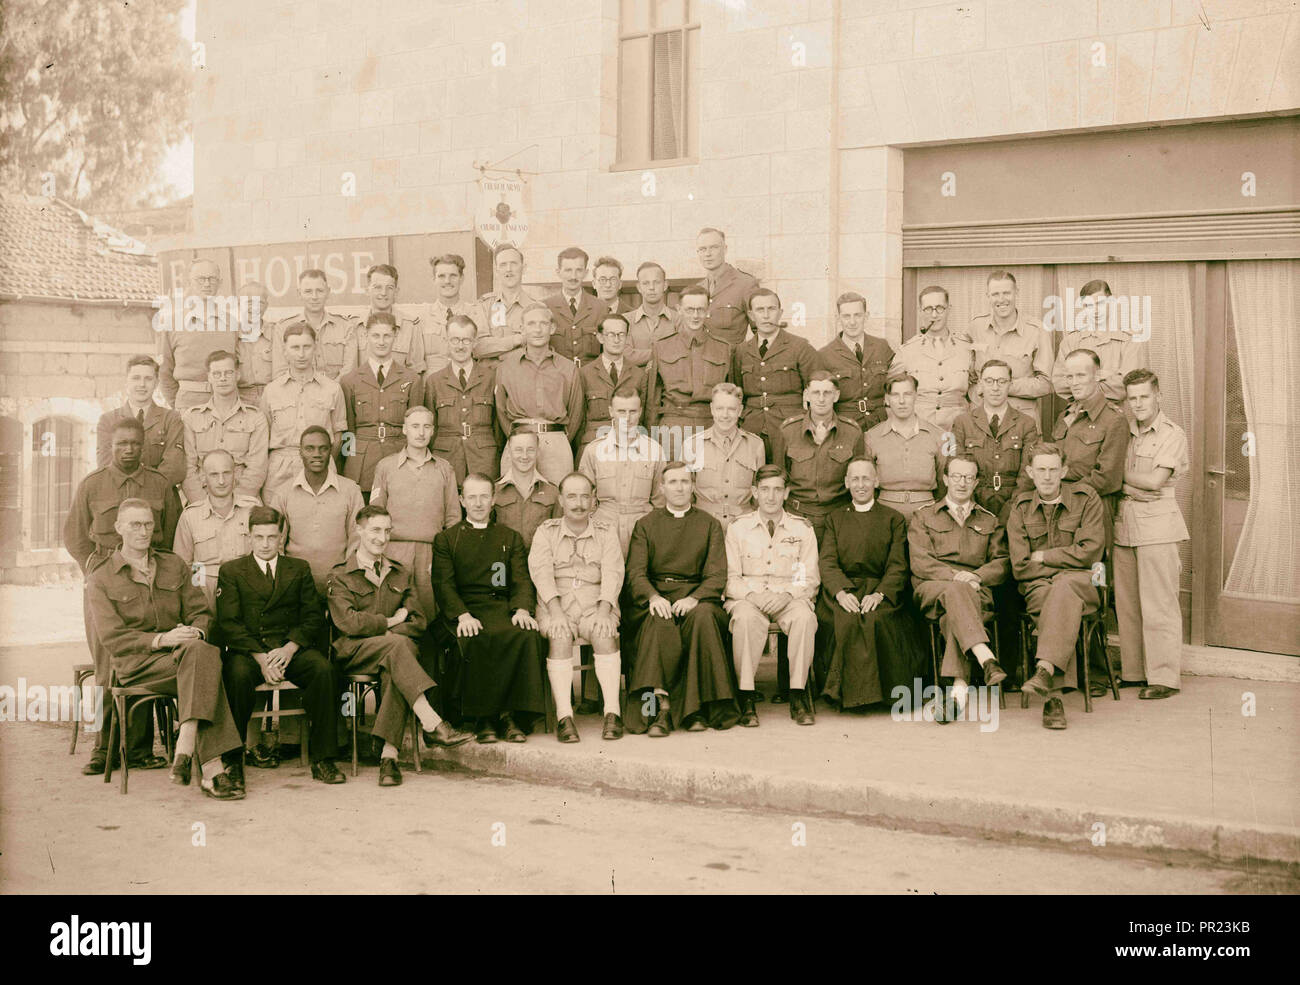 Ordination group at church army. Nov. 10, 1944, Middle East, Israel Stock Photo